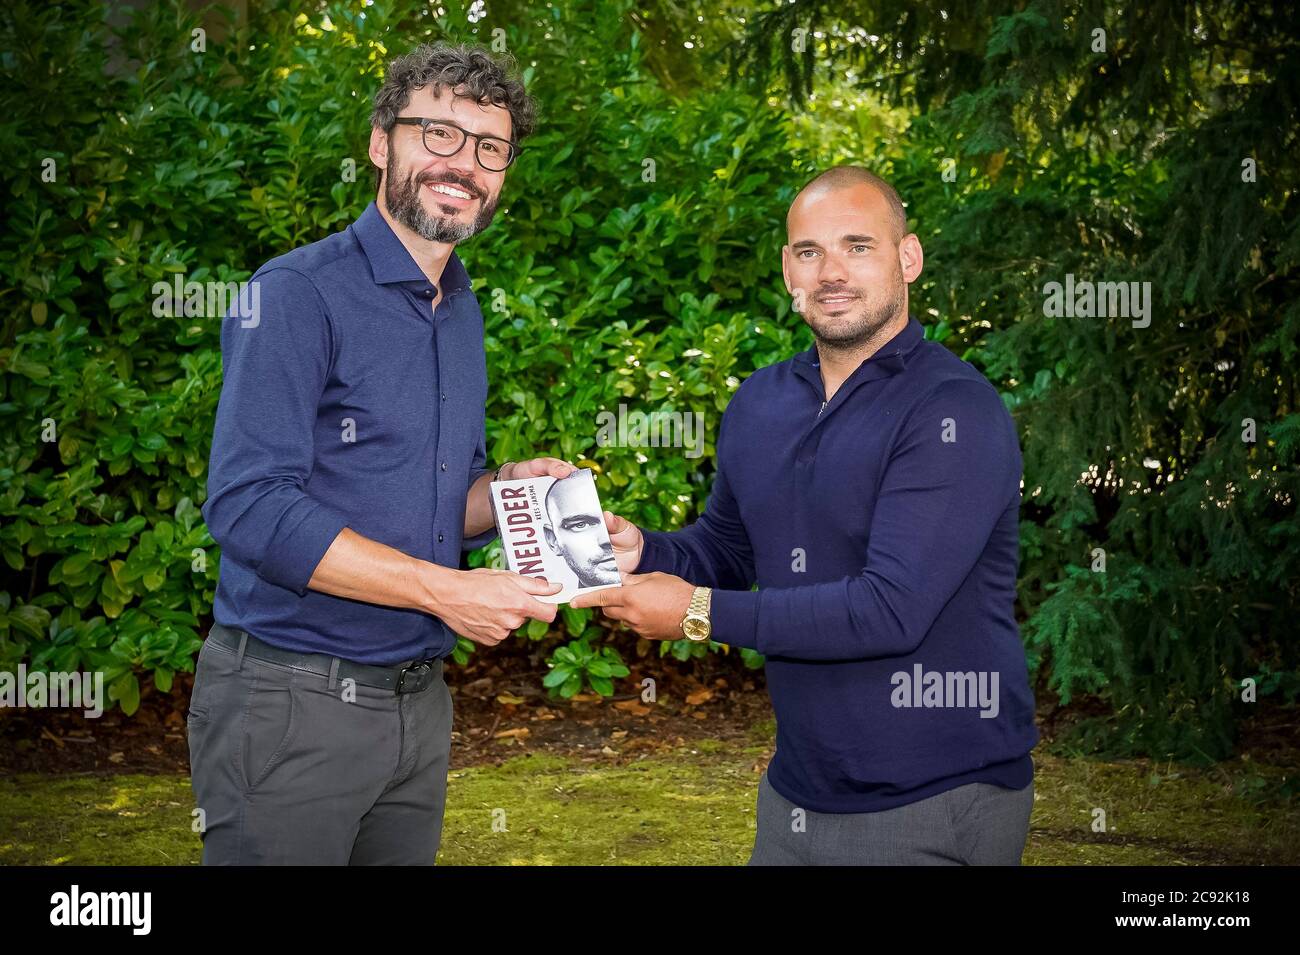 DOORN, Wesley Sneijder (R) presents his book Wesley, a biography written by Kees Jansma, Mark van Bommel (L) presents the first book, 27-06-2020, Oranjerie Doorn Credit: Pro Shots/Alamy Live News Stock Photo